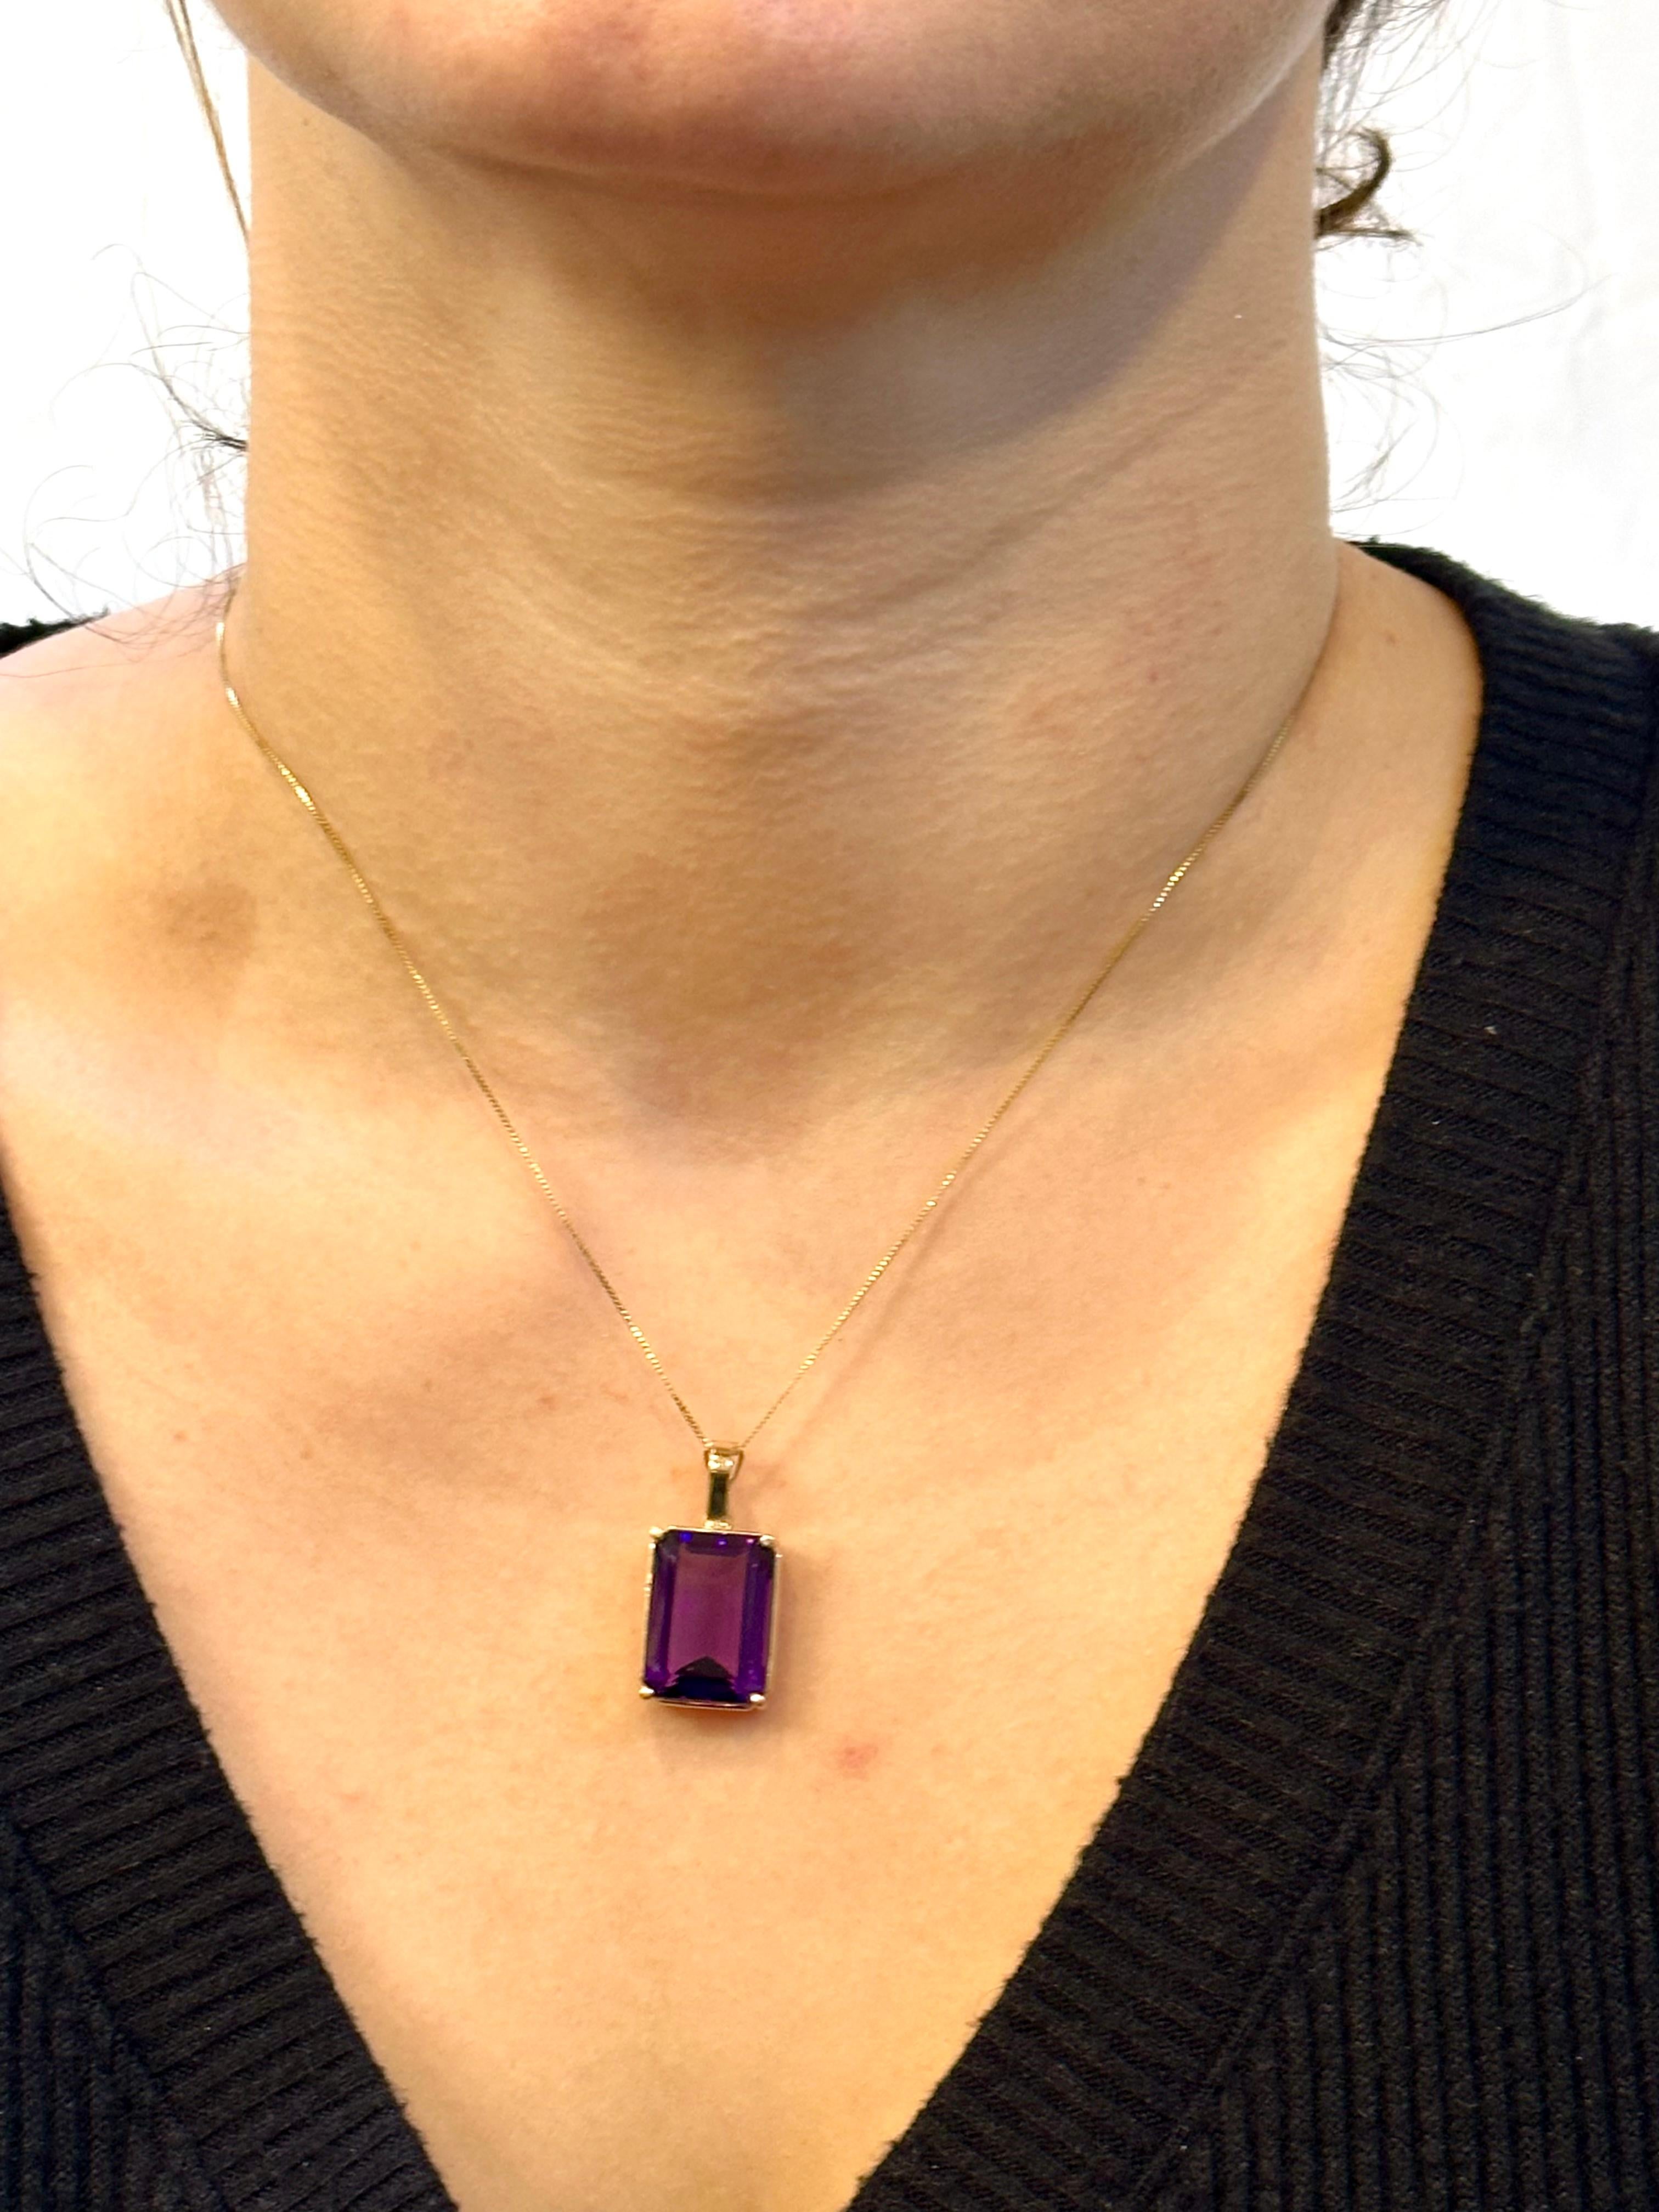 12 Ct Emerald Cut Amethyst Pendant /Necklace + 14 Kt Yellow Gold Chain Vintage For Sale 4